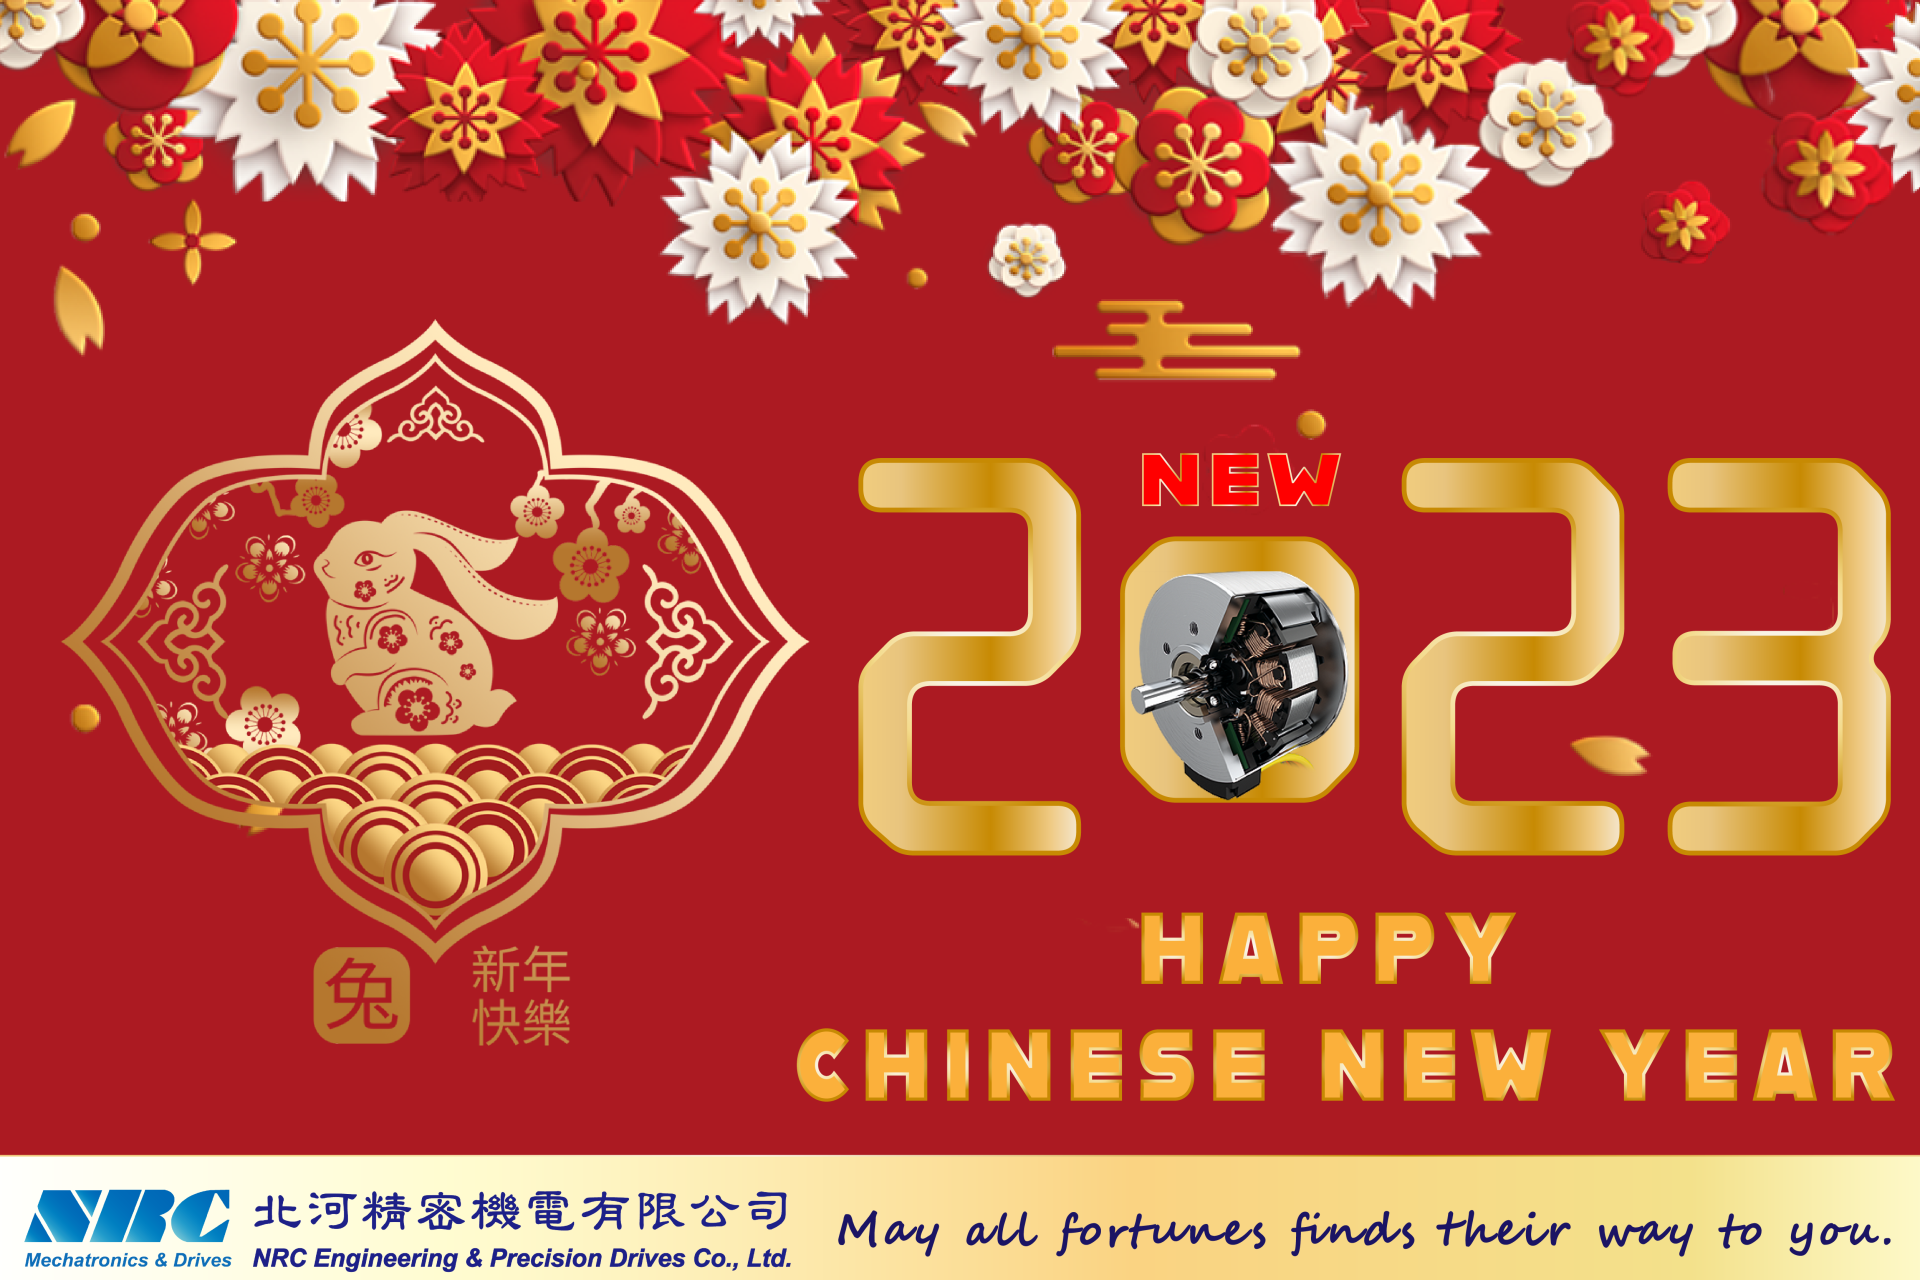 Dear valued partners, We will be on Chinese New Year leave from 1/20 to 1/29 and back on 1/30,2022.  May the Lucky Rabbit brings you a brand New Year.